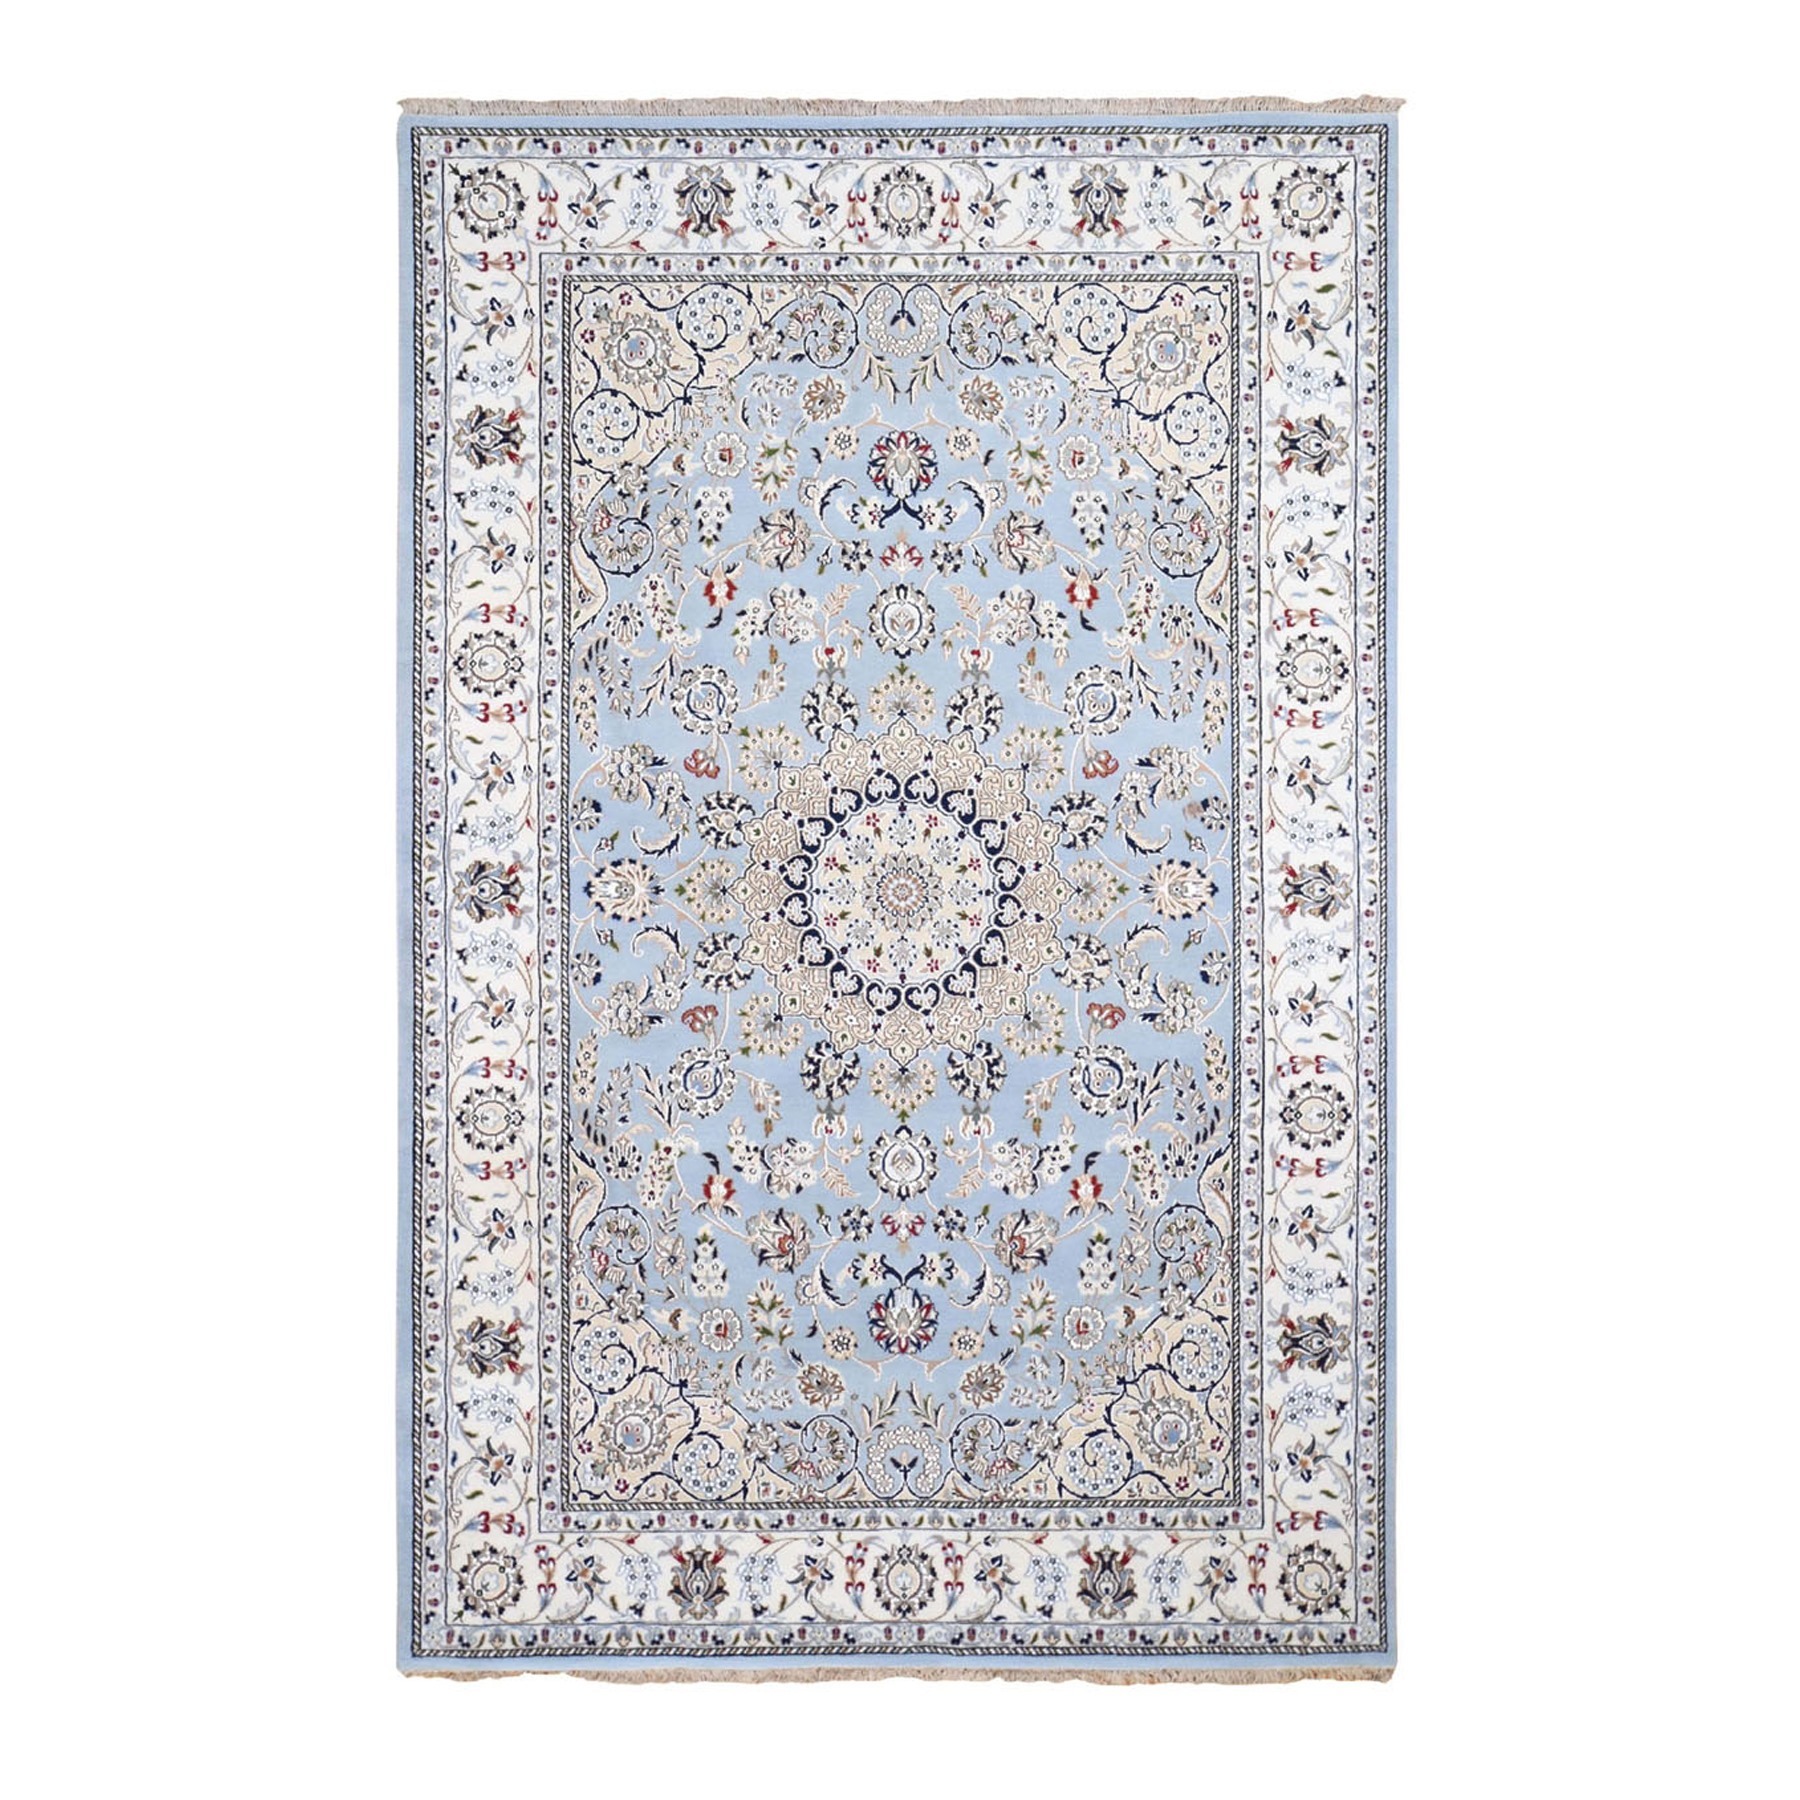 Pirniakan Collection Hand Knotted Blue Rug No: 1133370